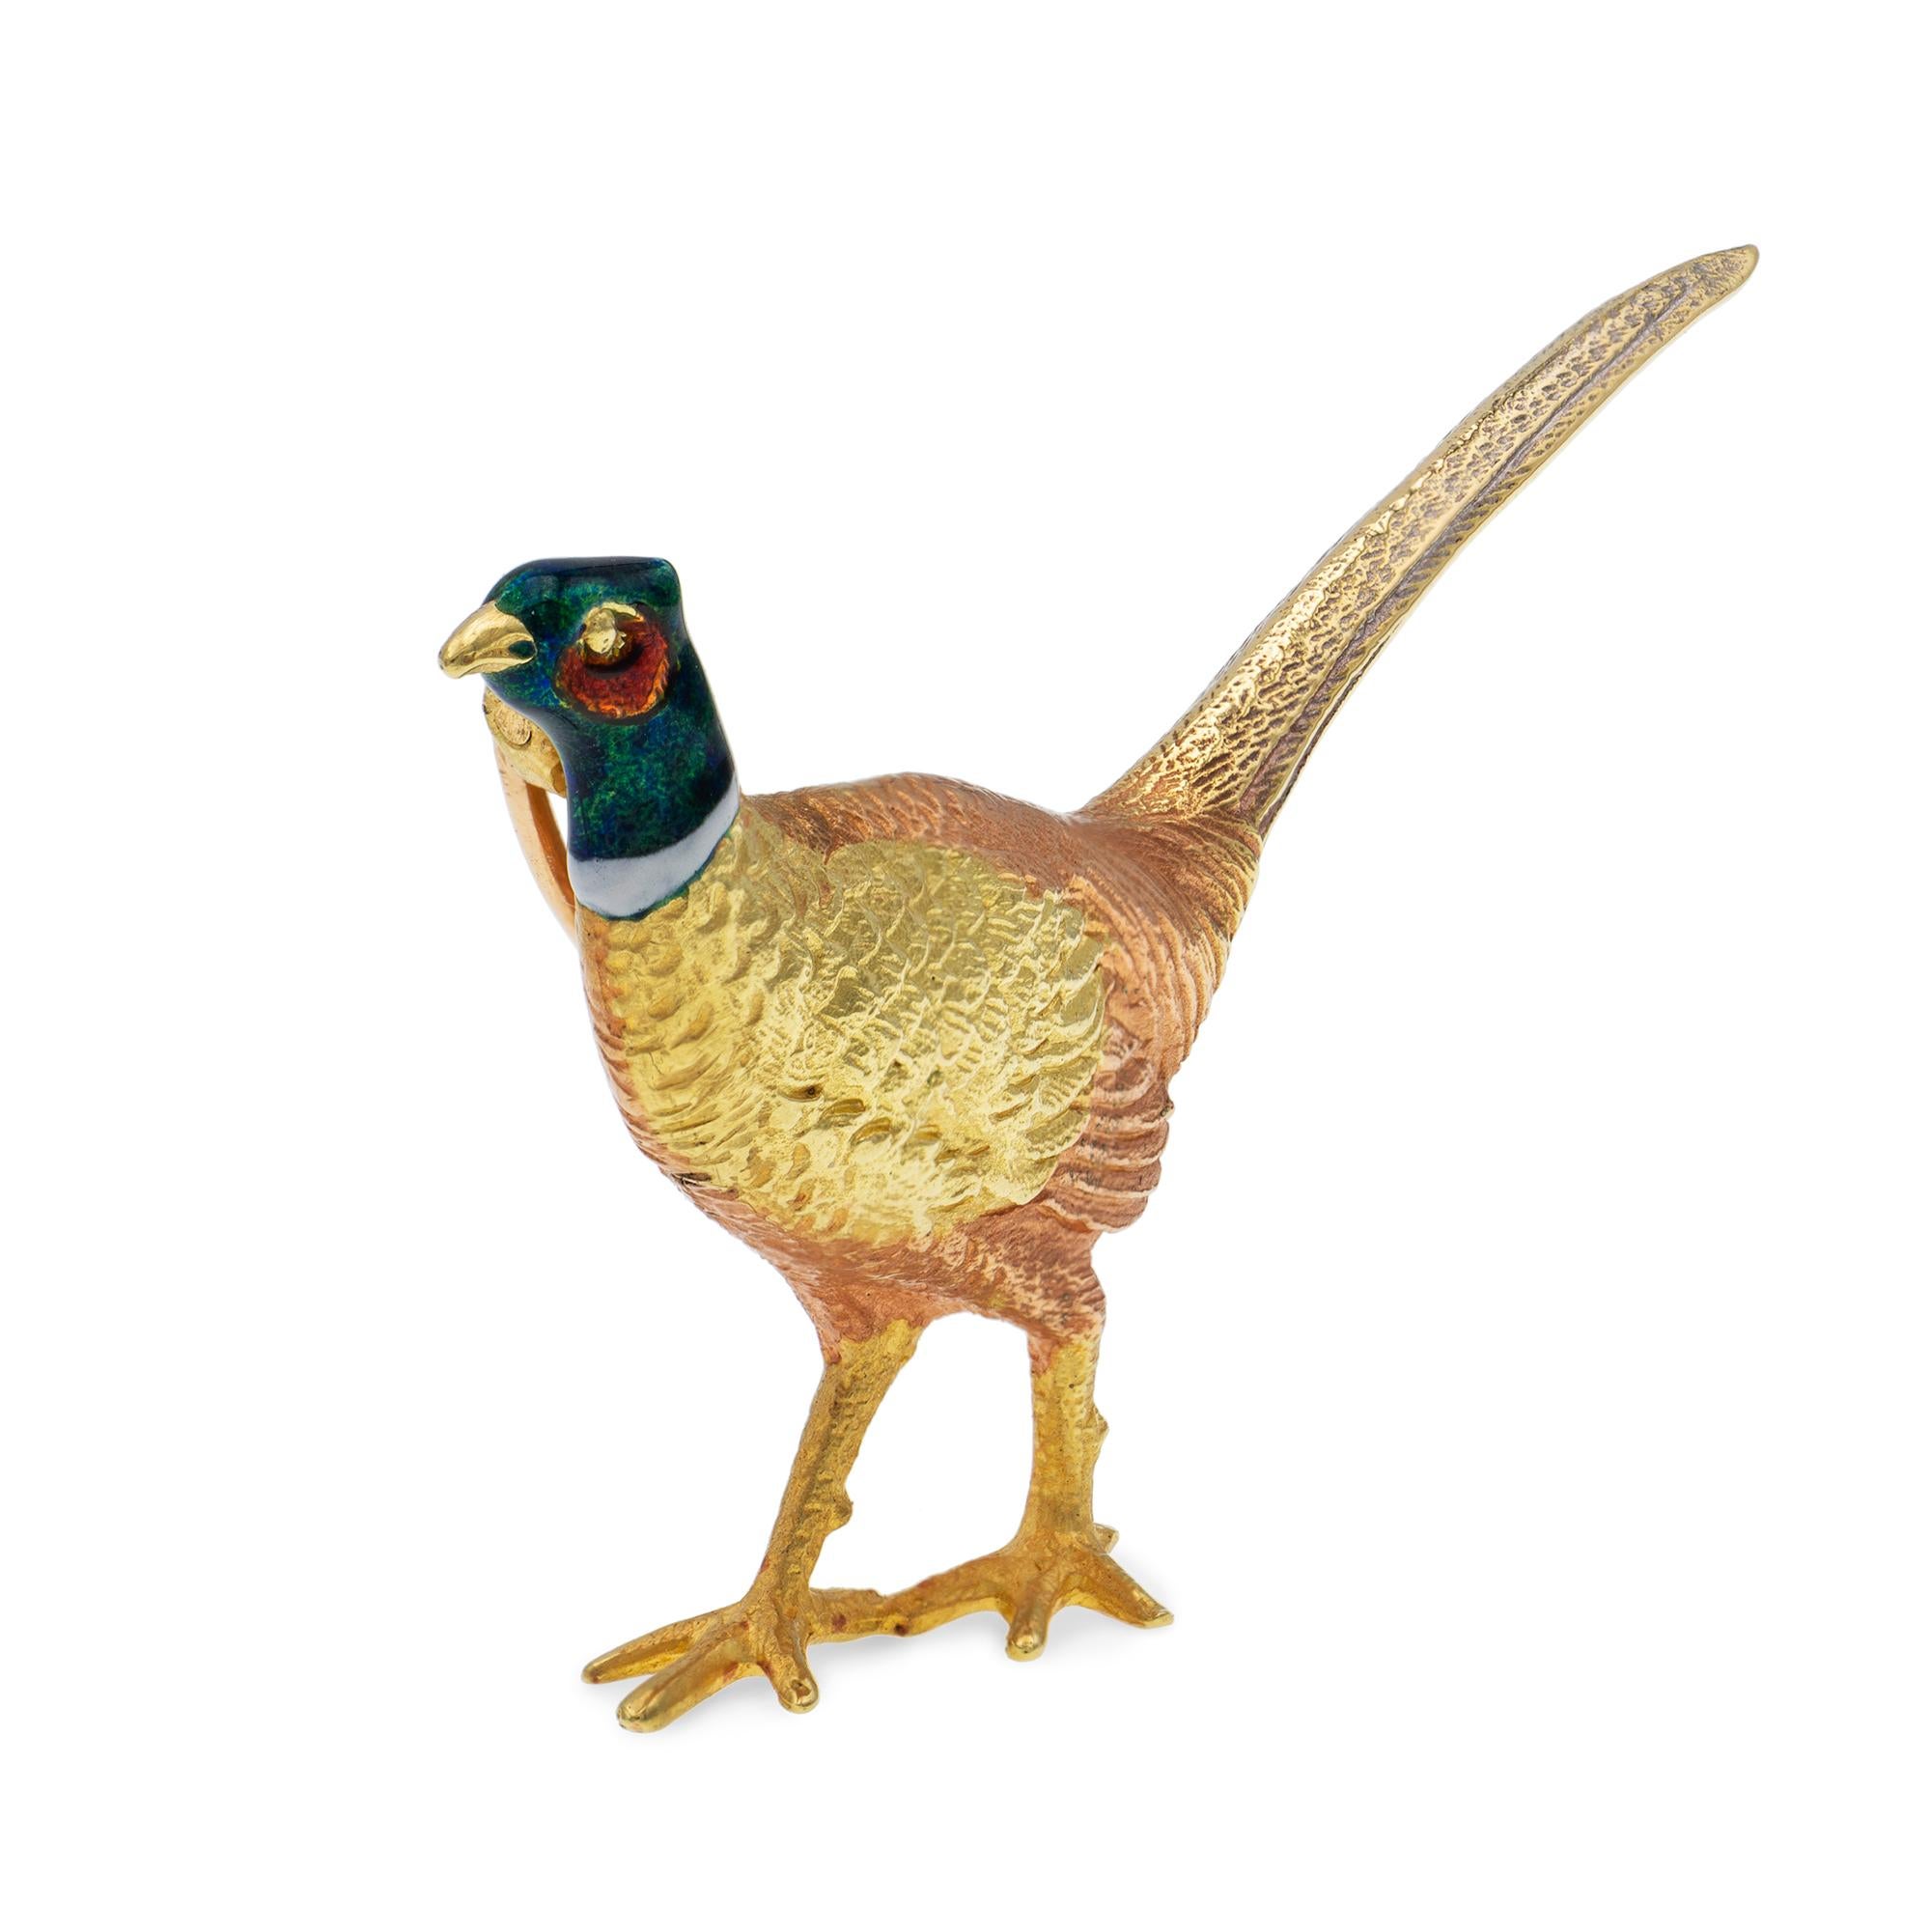 An enamel and gold pheasant brooch, depicting the adult male ring-necked pheasant, the body is realistically carved and made in rose and yellow gold with an enamelled head, measuring 5.9 x 2.6cm , hallmarked for 18ct gold, London 2017, bearing the